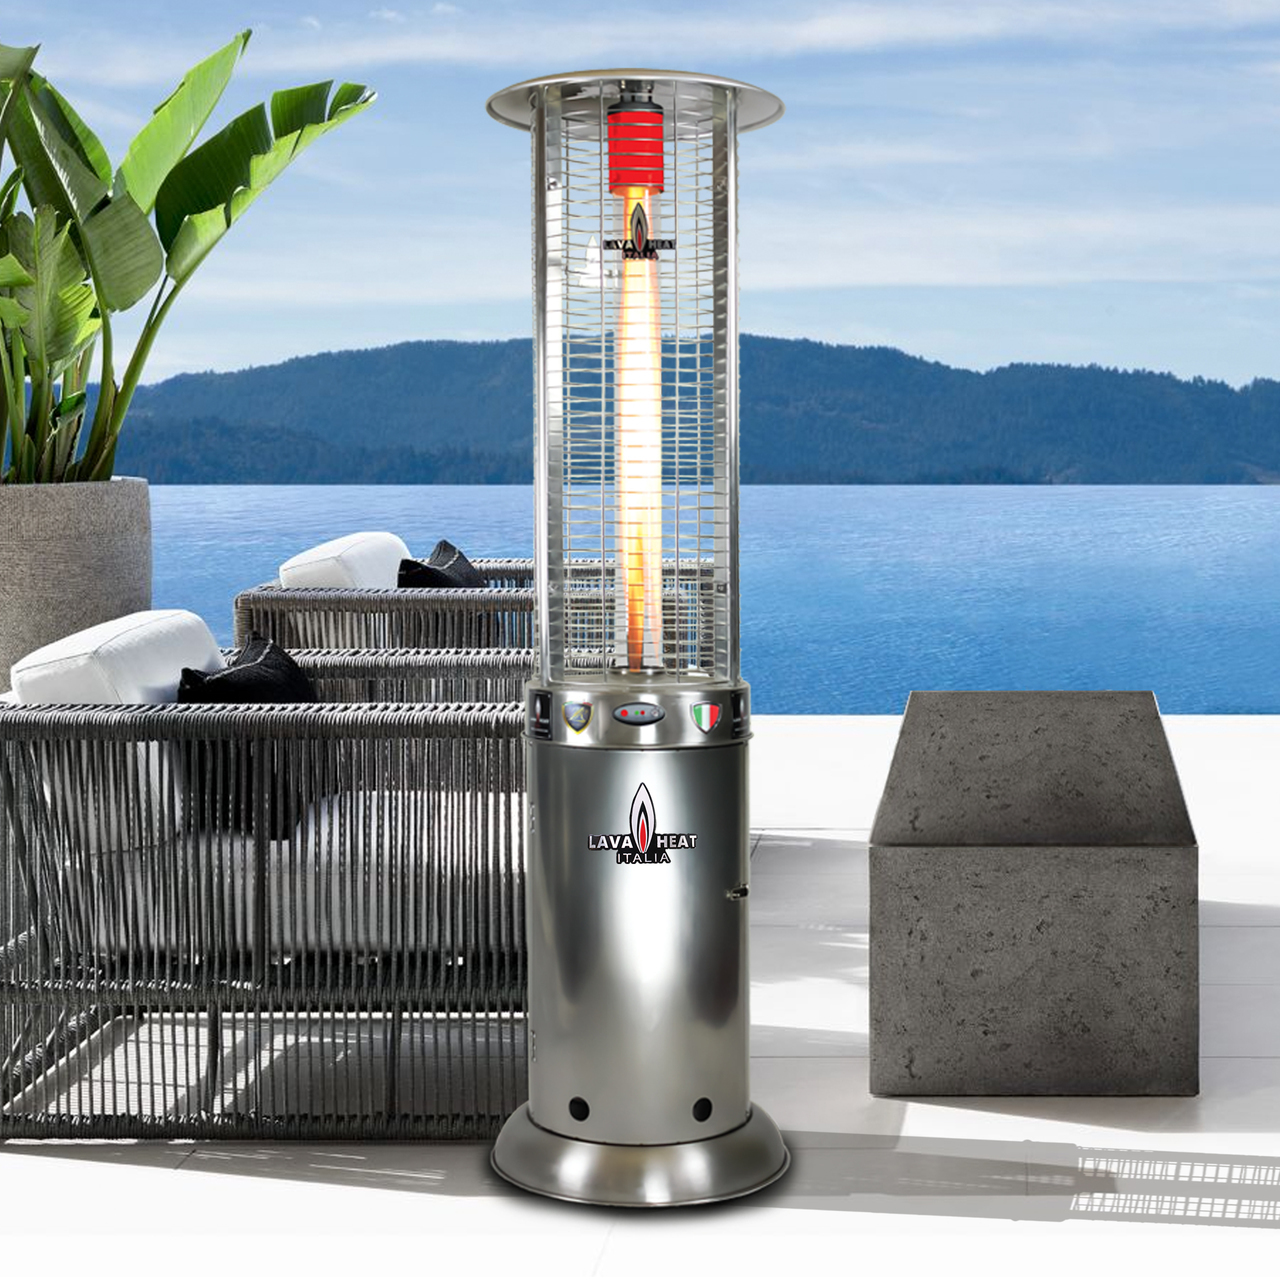 Rl7mps 7 Ft. Manual Ignition Opus Lite R-line Commercial Liquid Propane Flame Tower Heater - Stainless Steel